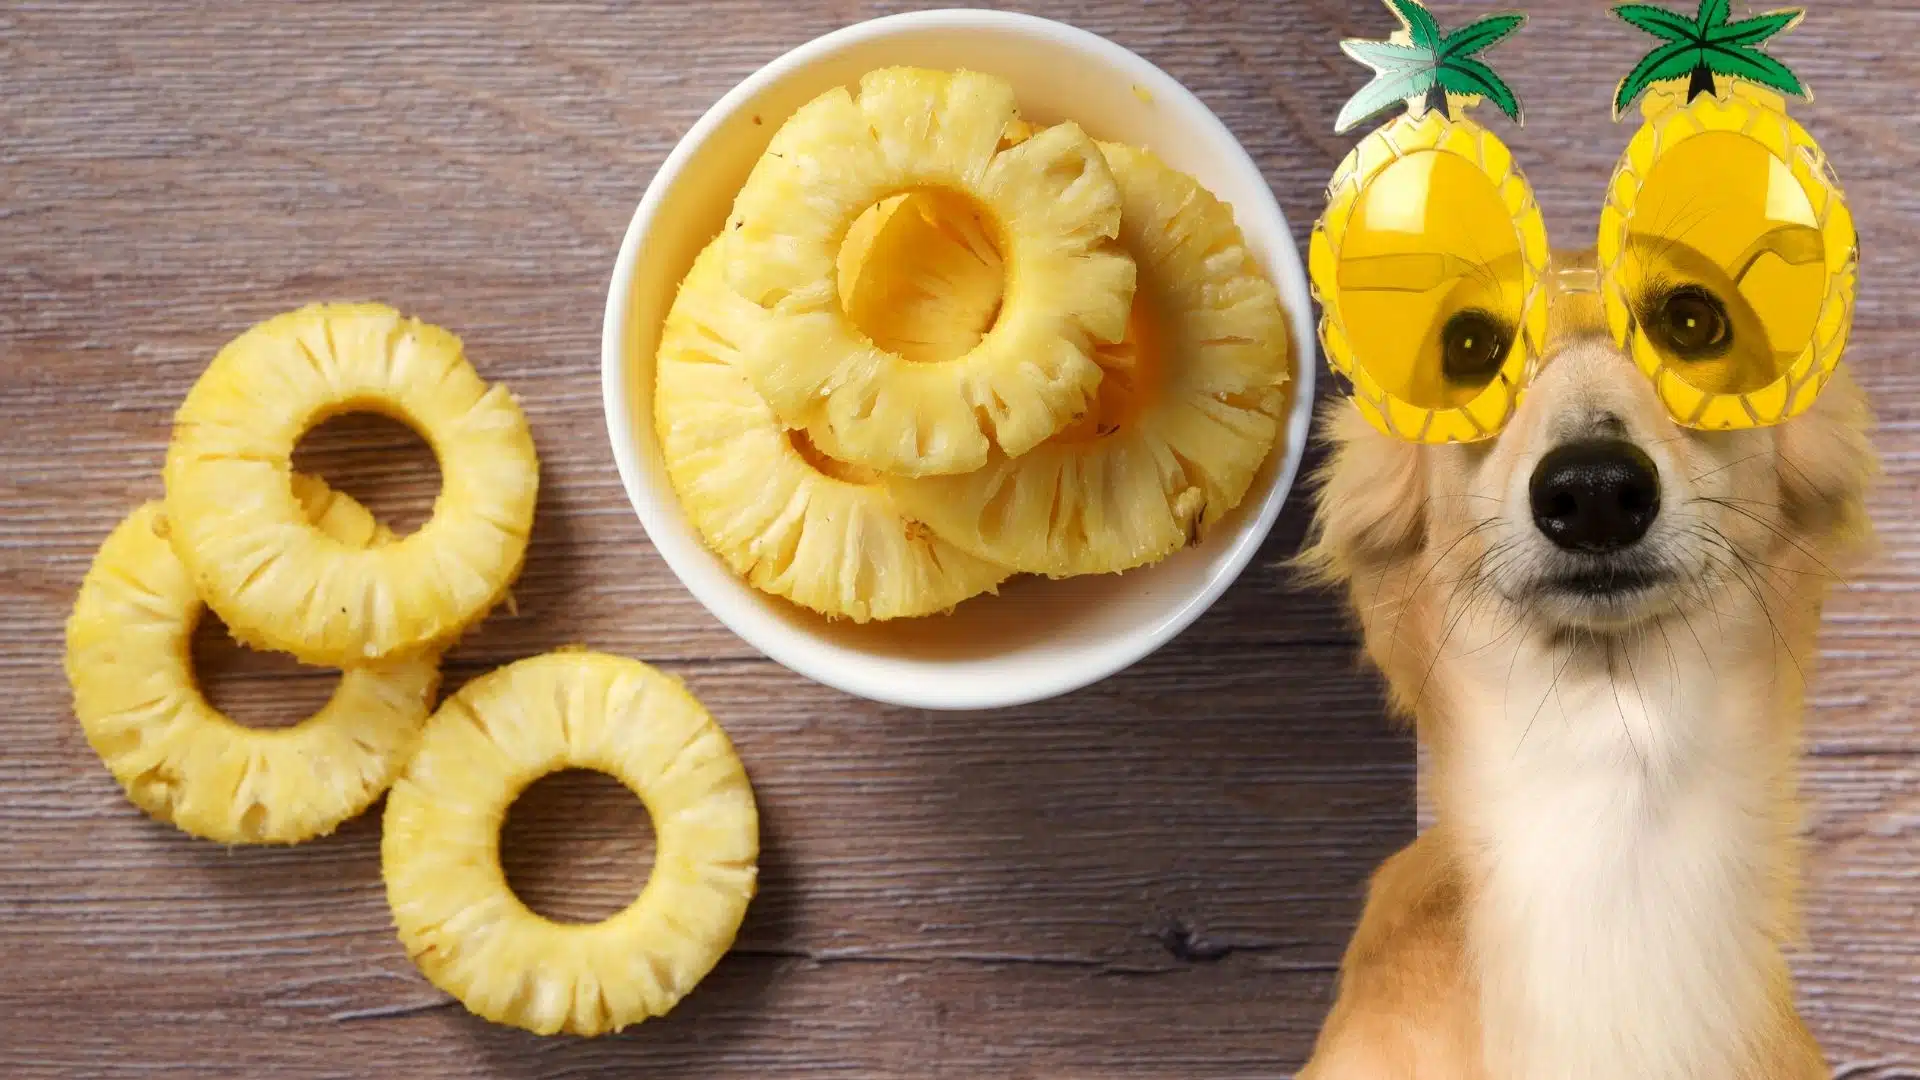 Can Dogs Eat Pineapple? Our Vet Weighs In